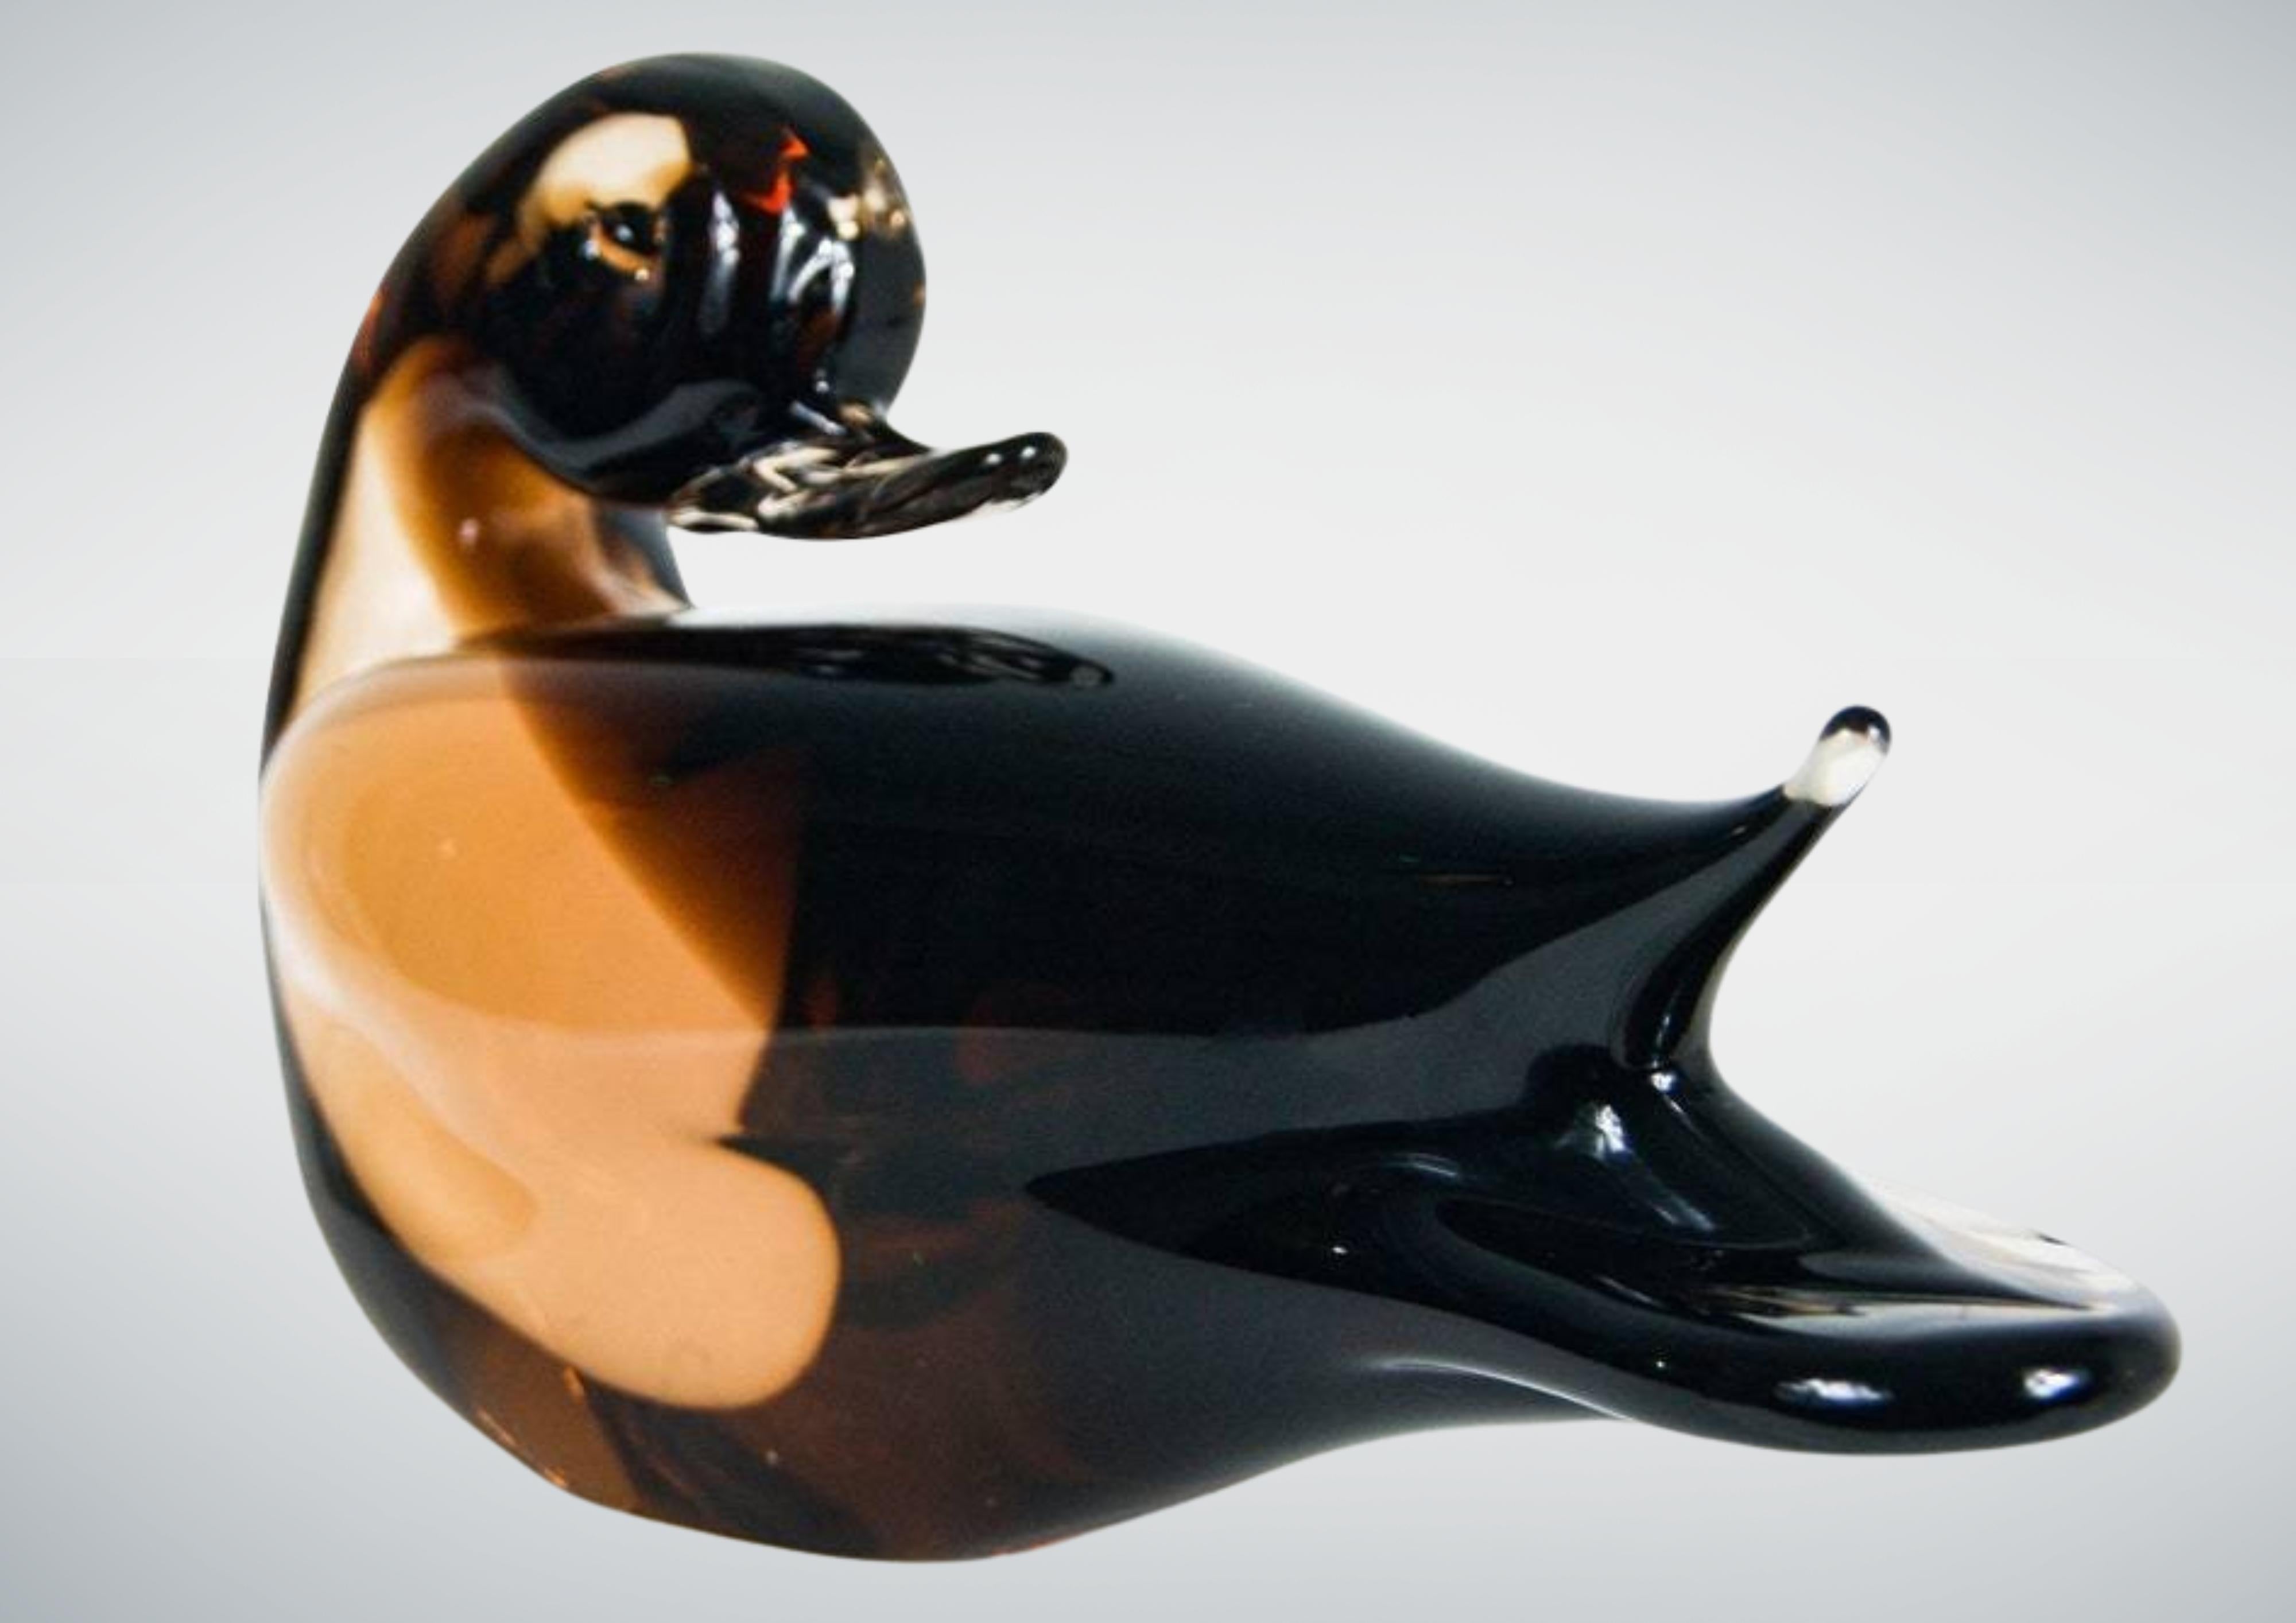 Monumental chunky glass duck by V Nason & Co Murano.
Solid amber glass duck sculpture weighing approximately 3.5kg prepackaged.
Still retains its original silver foil label.
No damage.